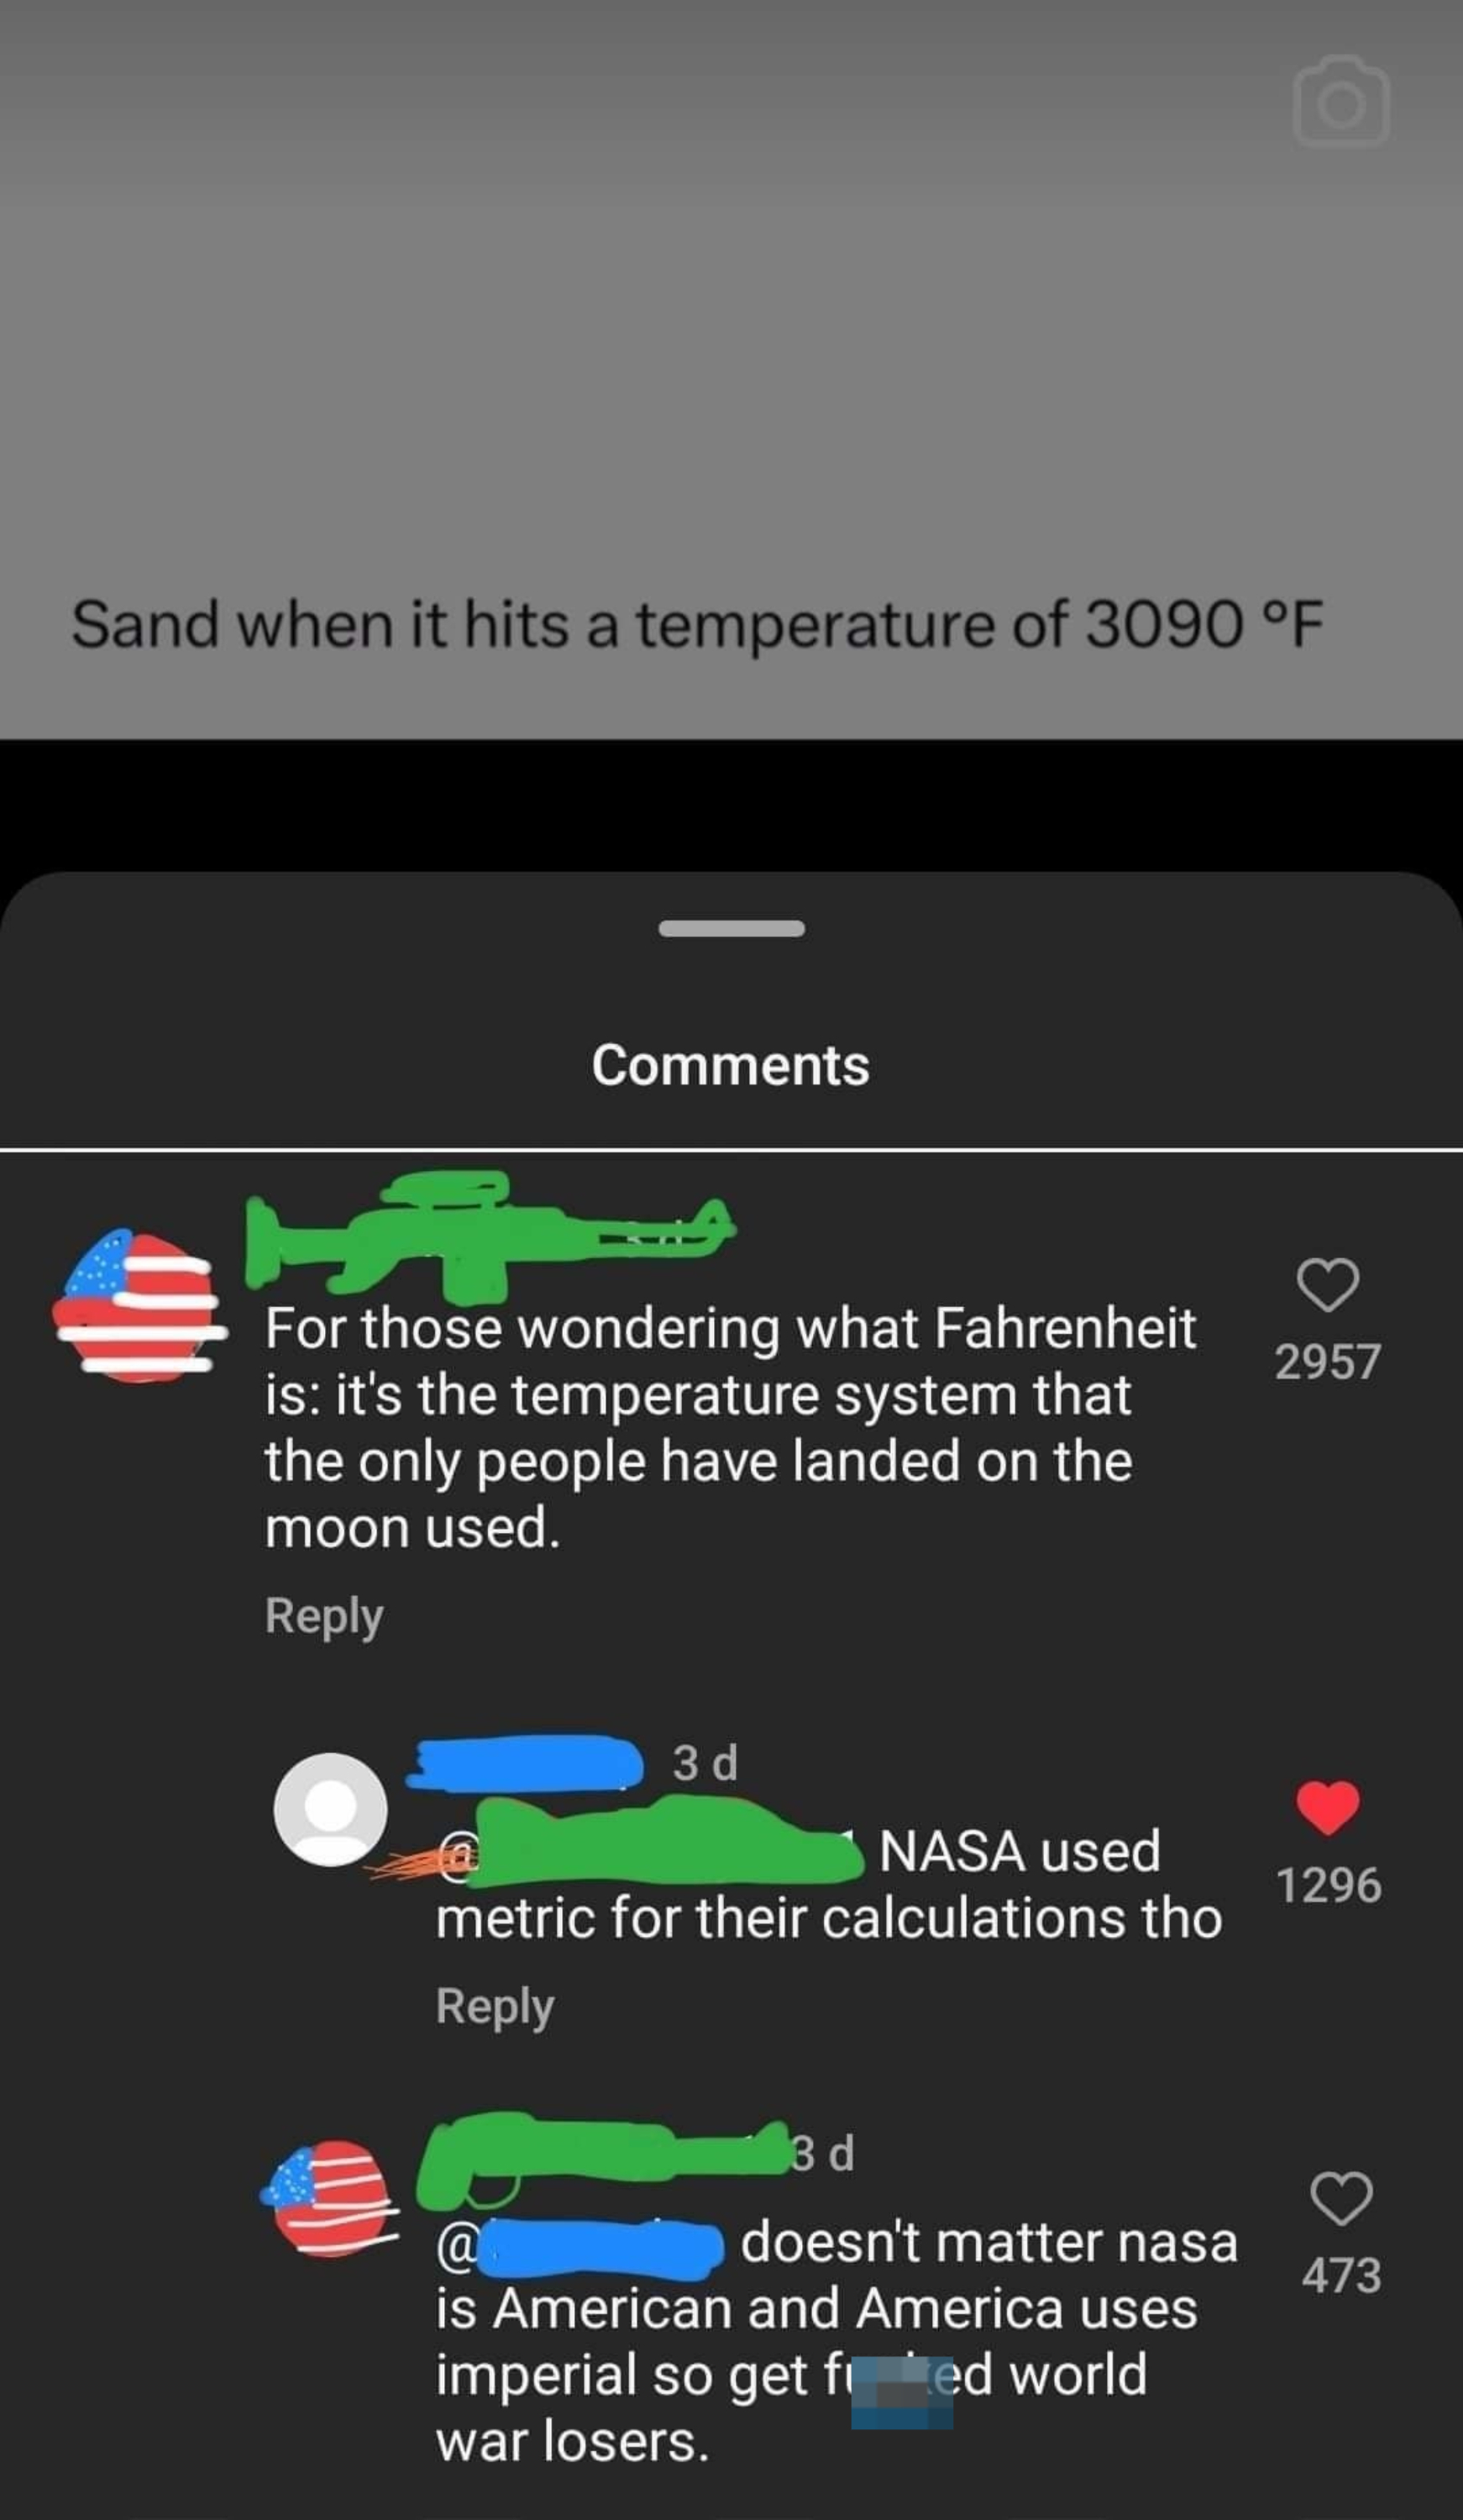 Commentary on a social media post about temperature systems with flags representing countries